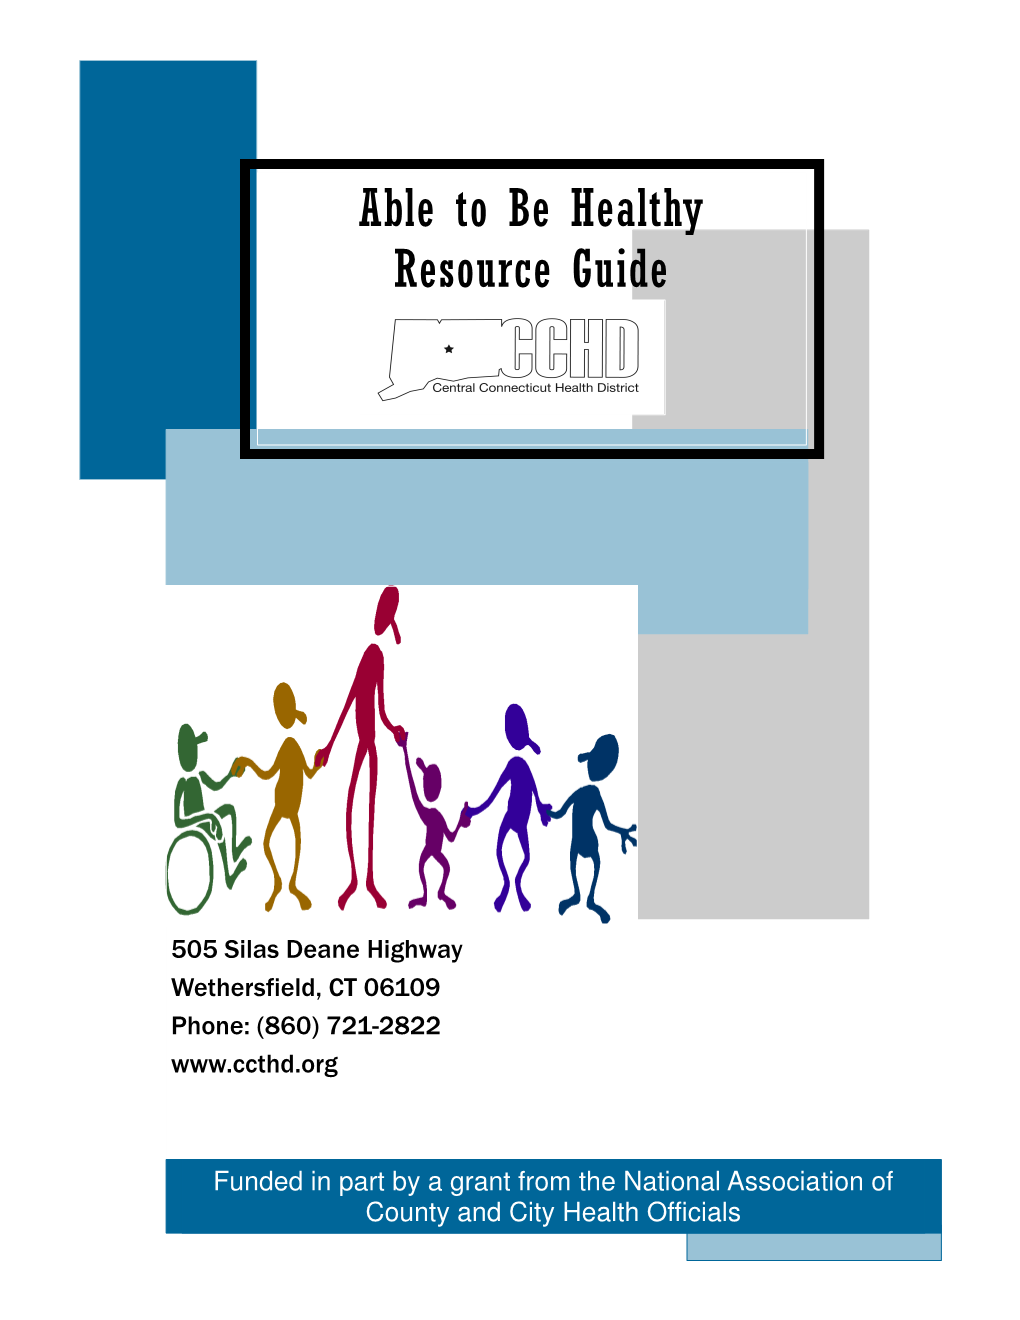 Able to Be Healthy Resource Guide